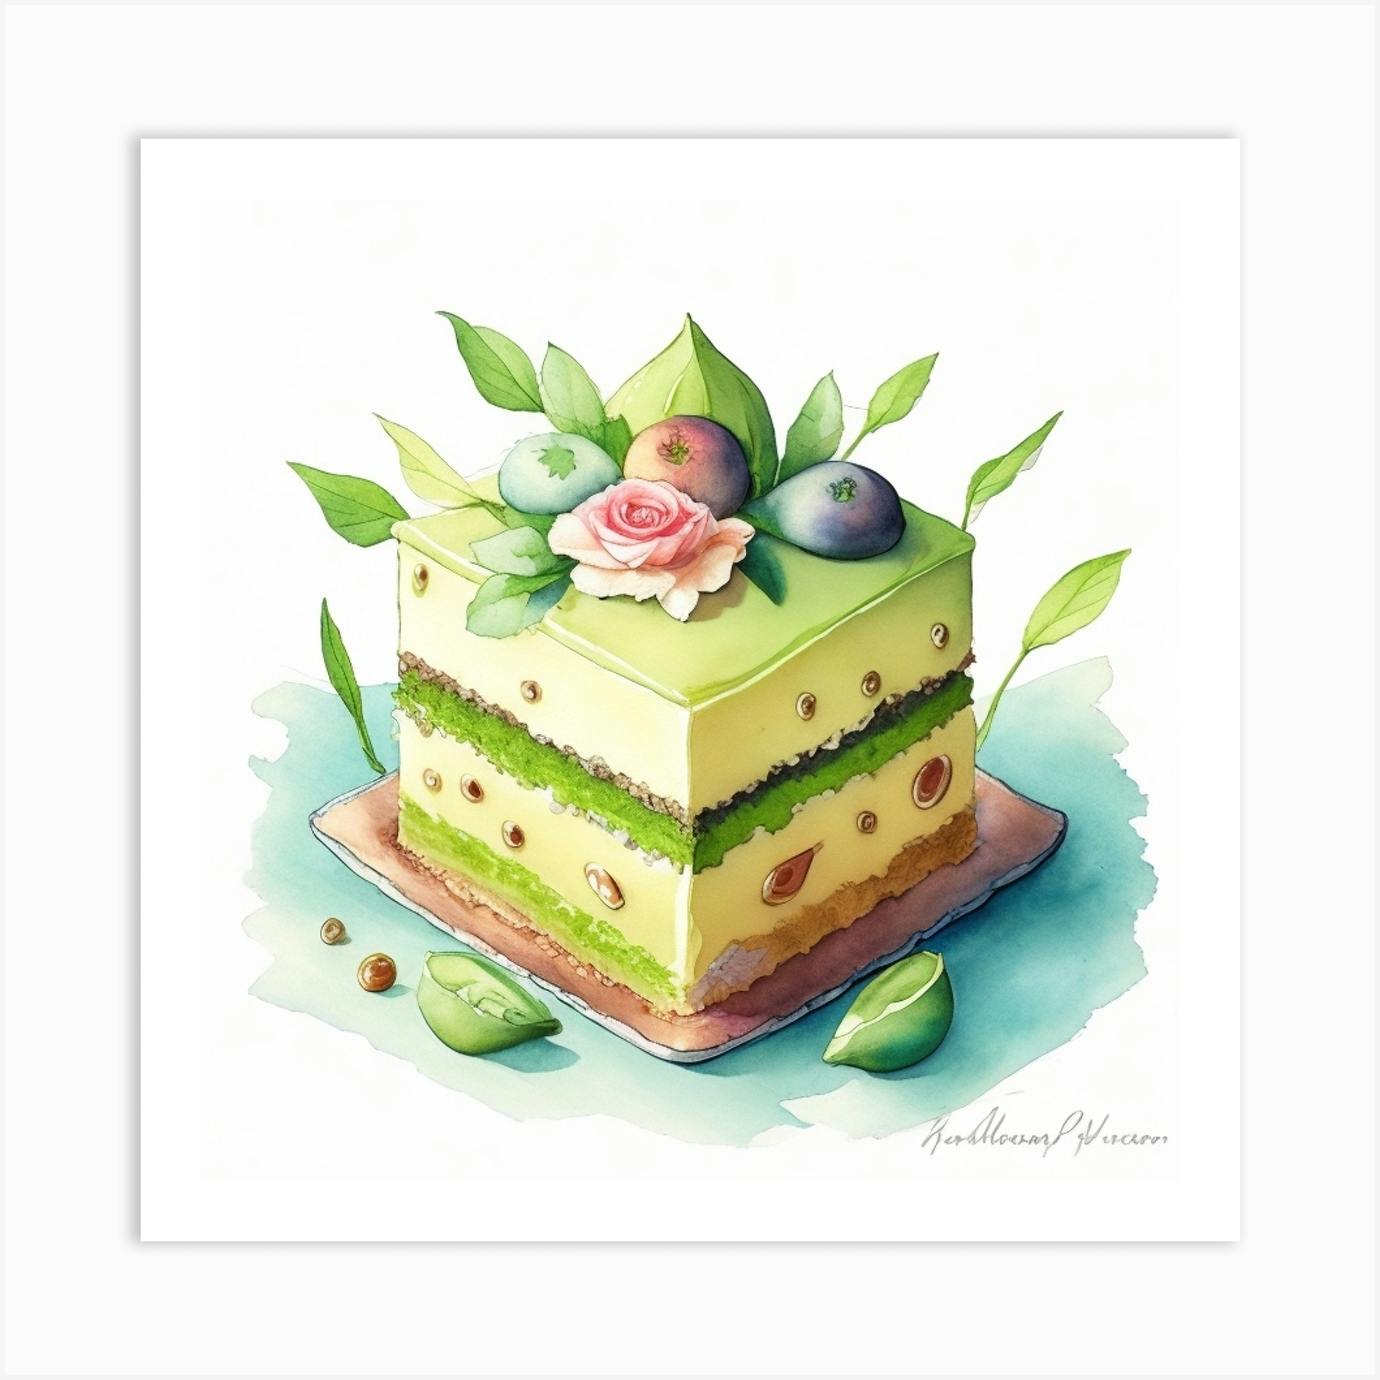 Cake Window Watercolor Painting Art Dessert Display No. 3 Print Colorful  Food Illustration Still Life Watercolor Painting 11x14 Print - Etsy